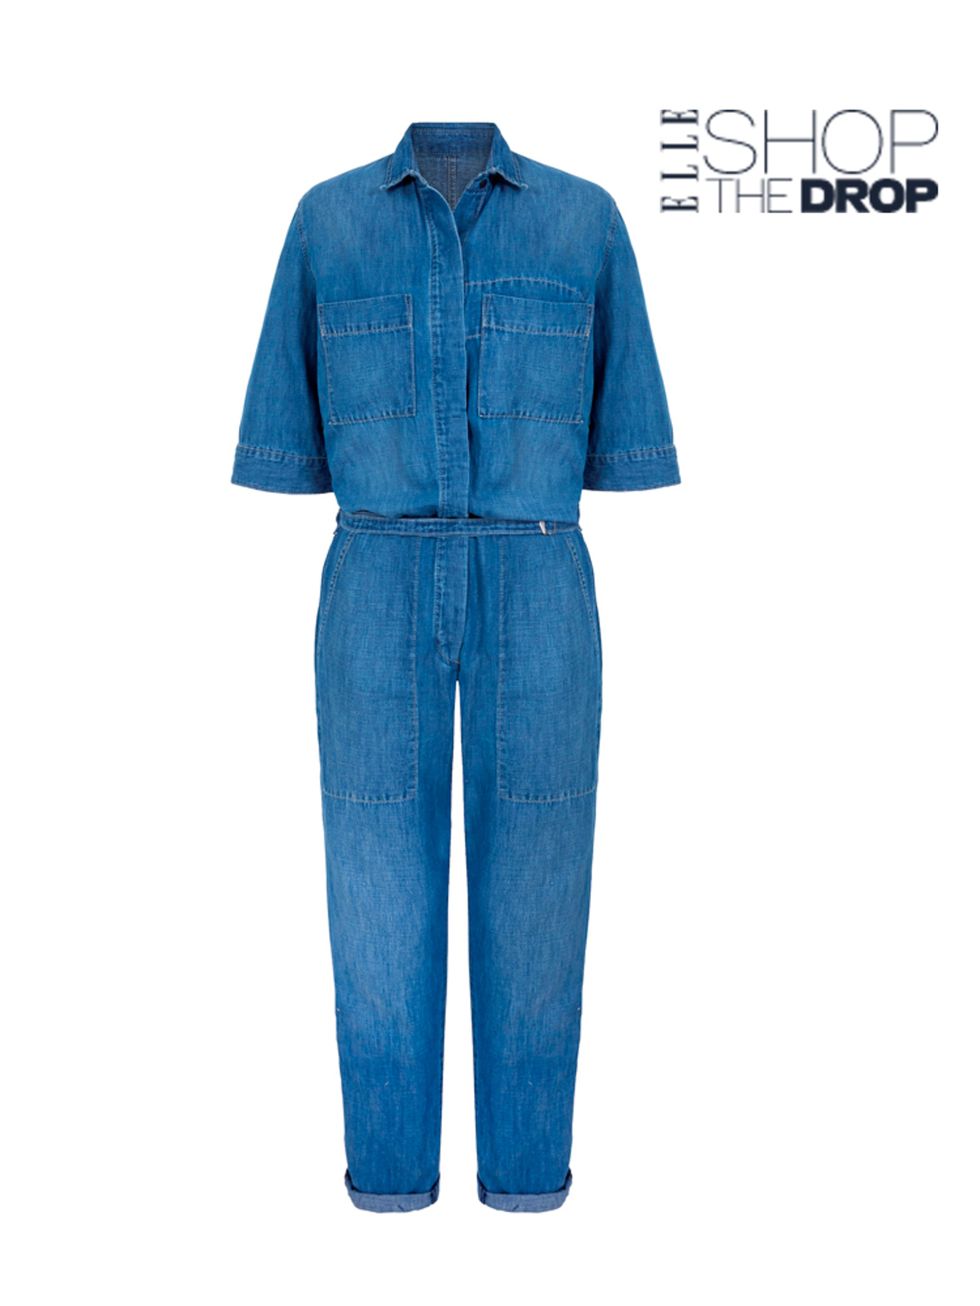 <p>This denim jumpsuit is going to be your new best friend.</p>

<p><a href="http://www.gap.co.uk/browse/product.do?cid=1028671&amp;vid=1&amp;pid=000227334000" target="_blank">Gap</a> jumpsuit, &pound;59.99</p>

<p><a href="http://www.hearstmagazines.co.u